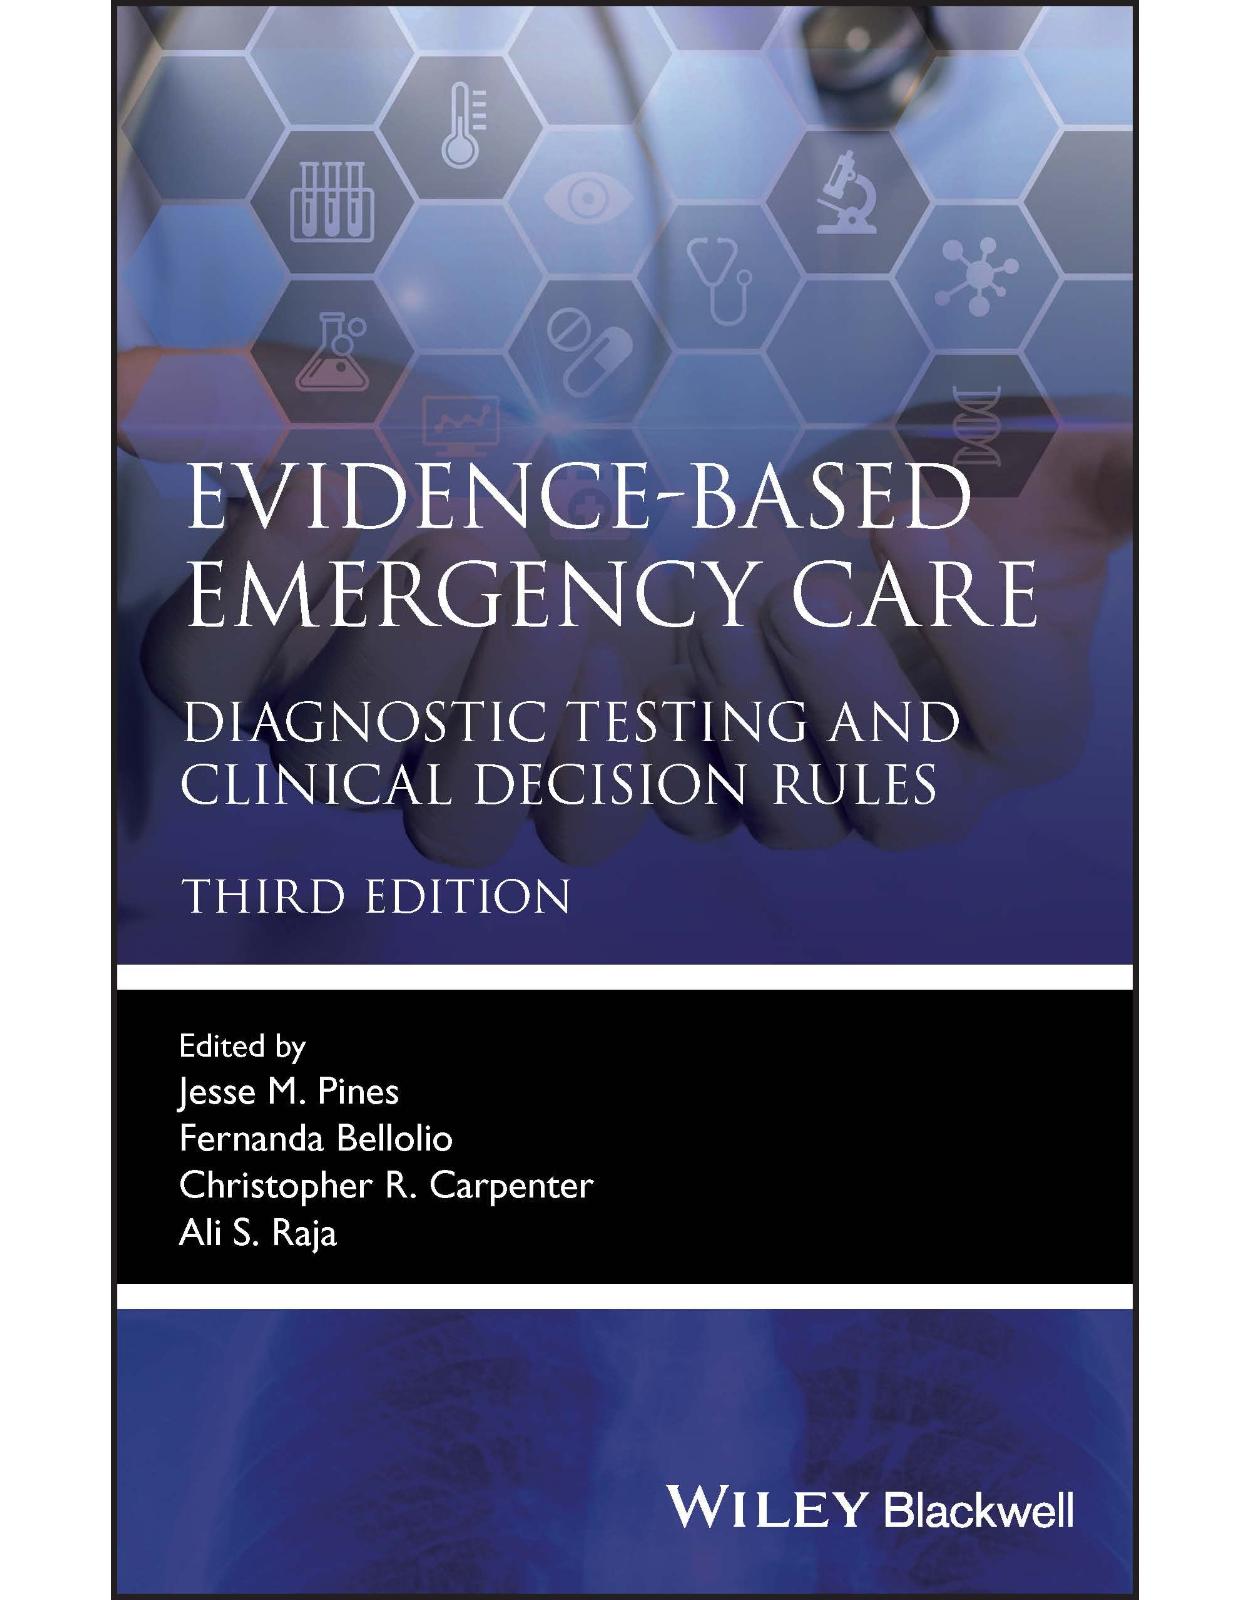 Evidence-Based Emergency Care: Diagnostic Testing and Clinical Decision Rules